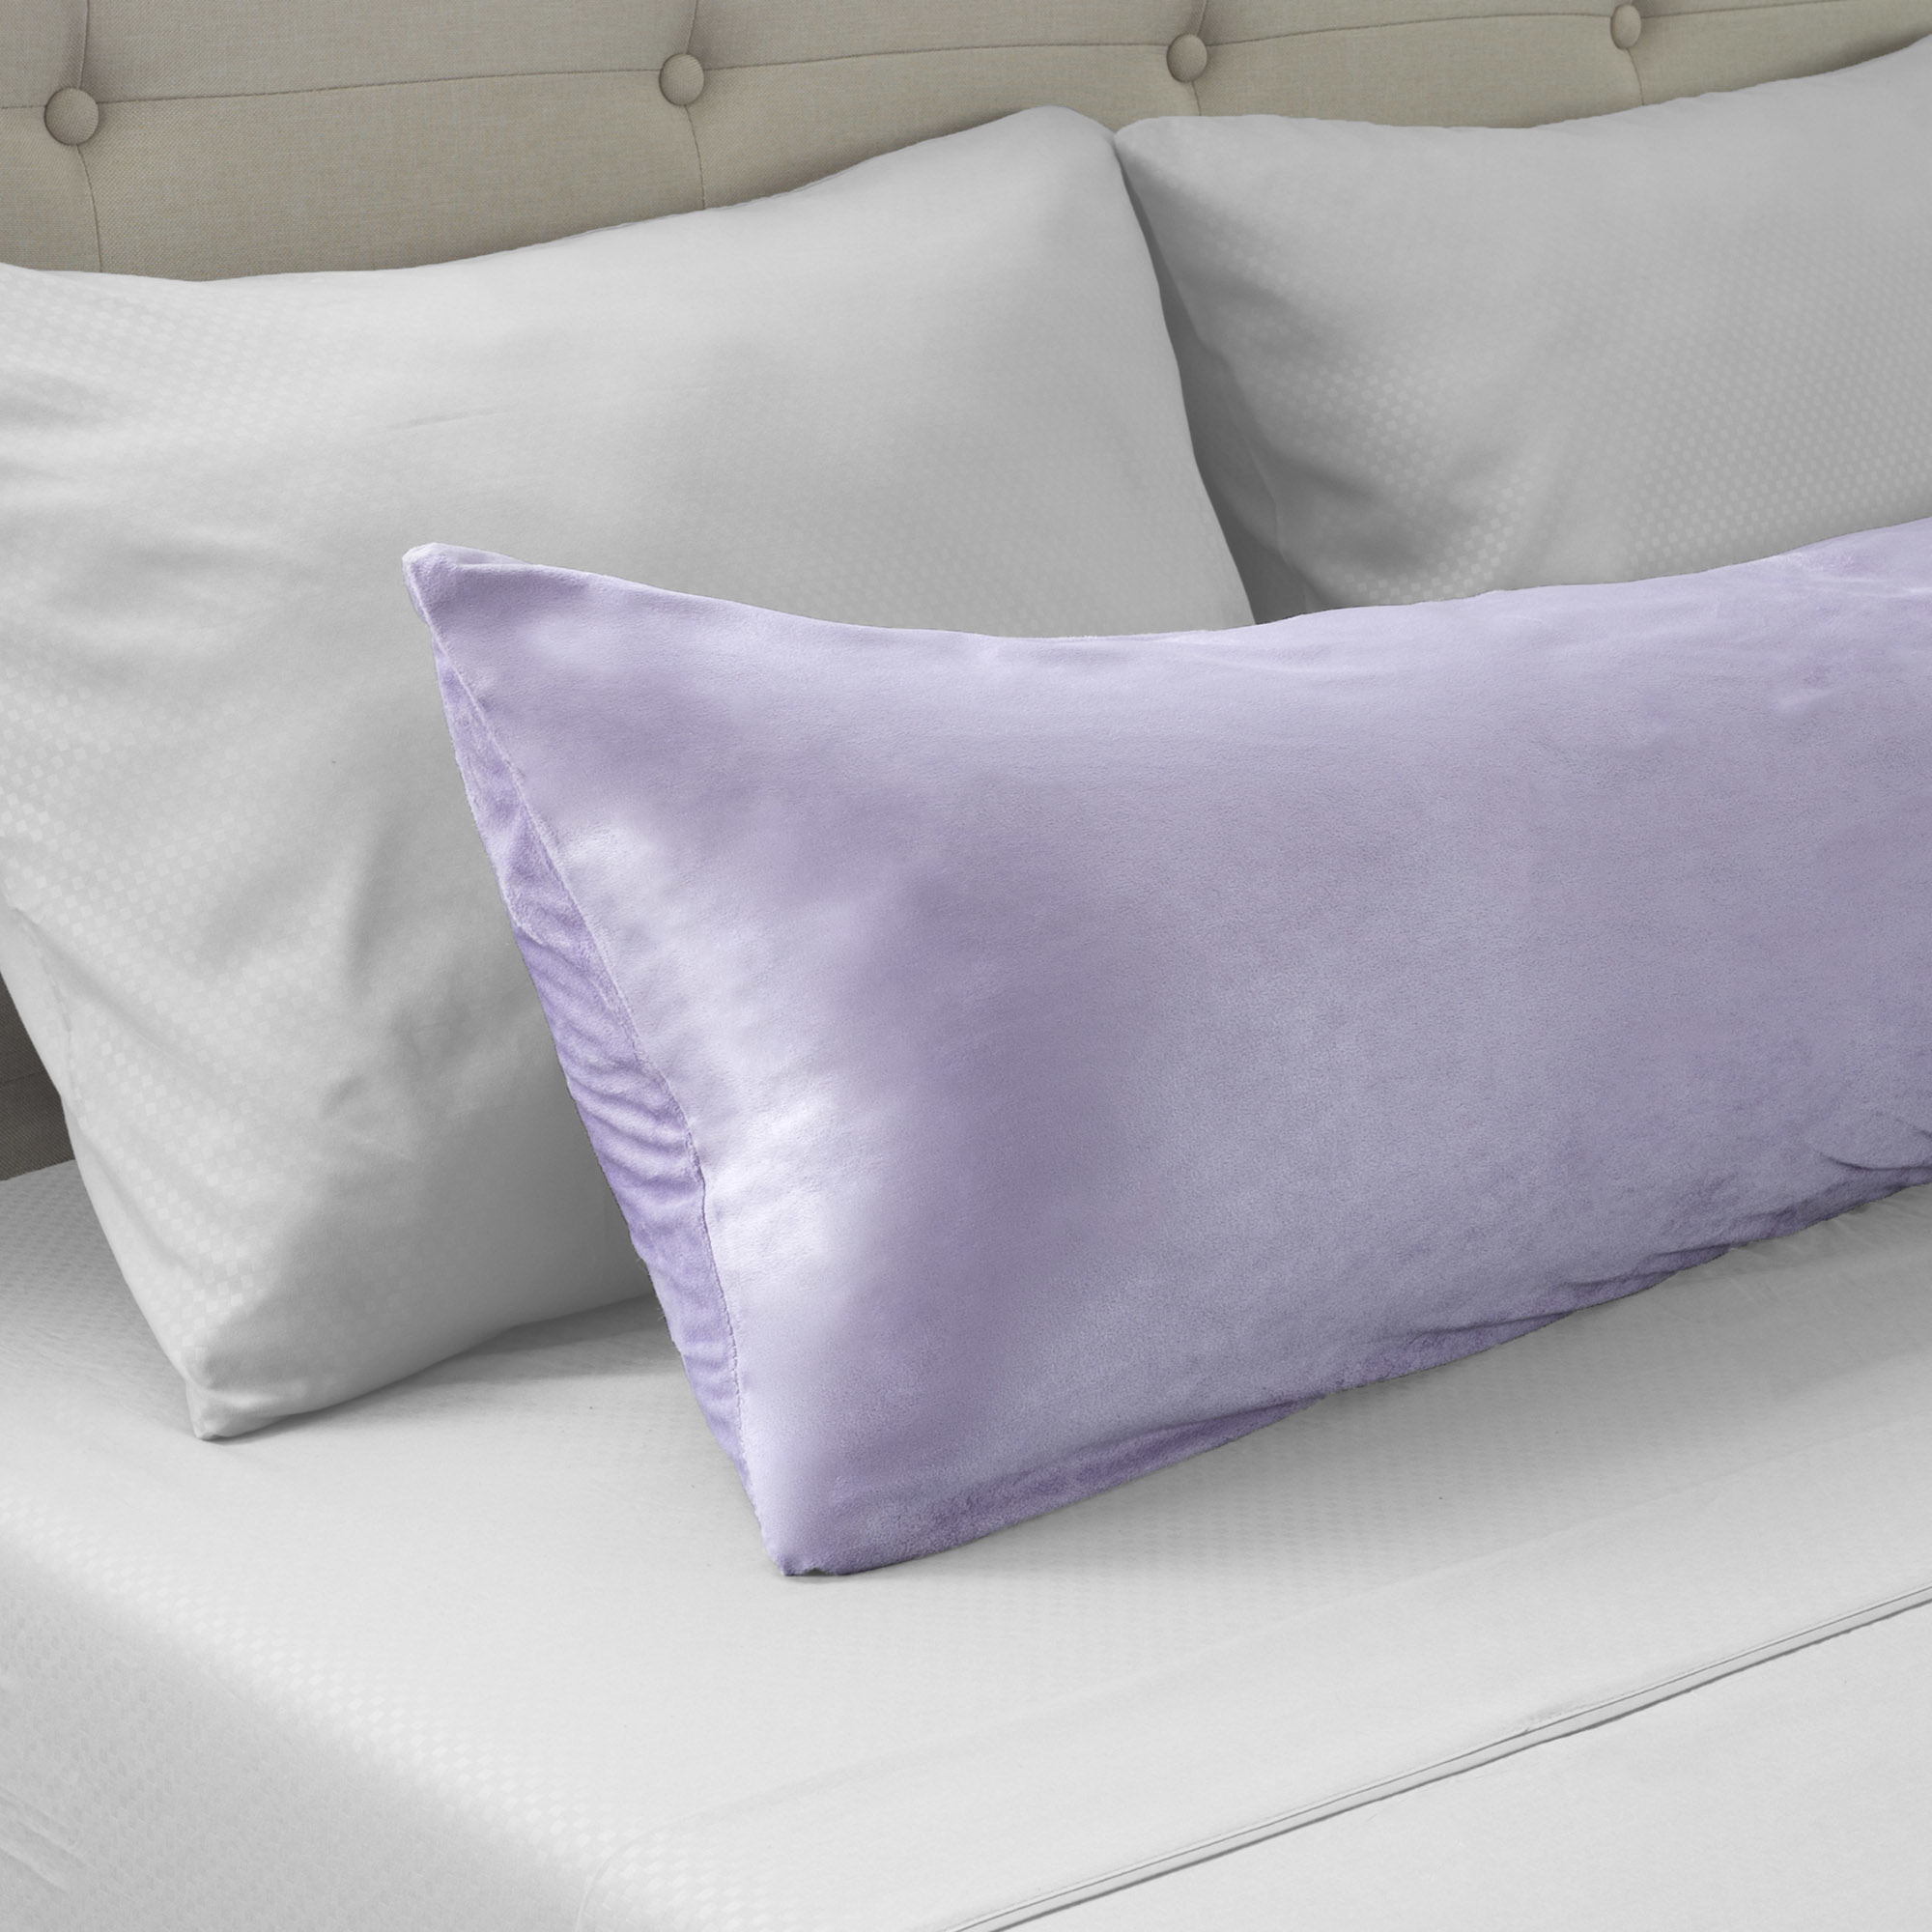 Microsuede Body Pillow Cover Pillowcase Zippered Washable 51 X 17 Inches Periwinkle